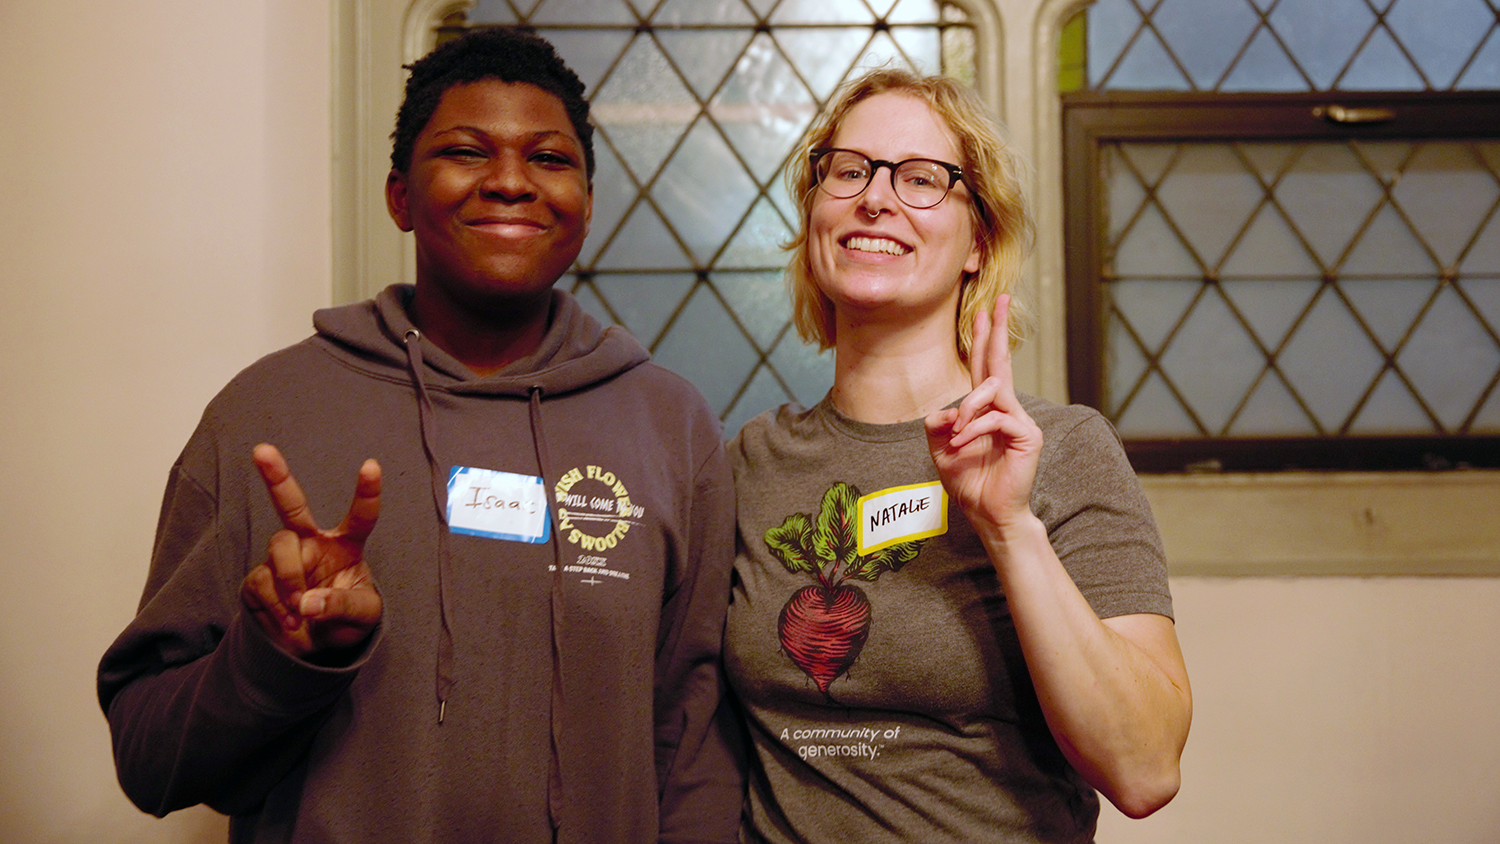 Isaac Williams and Natalie Ross stand side by side, each offering a smile and a peace sign to the camera. He is wearing a hooded sweatshirt, and she is wearing a Kinship T-shirt adorned with a radish and bearing the phrase “A community of generosity.” Like everyone at Kinship, they are each wearing name tags.  